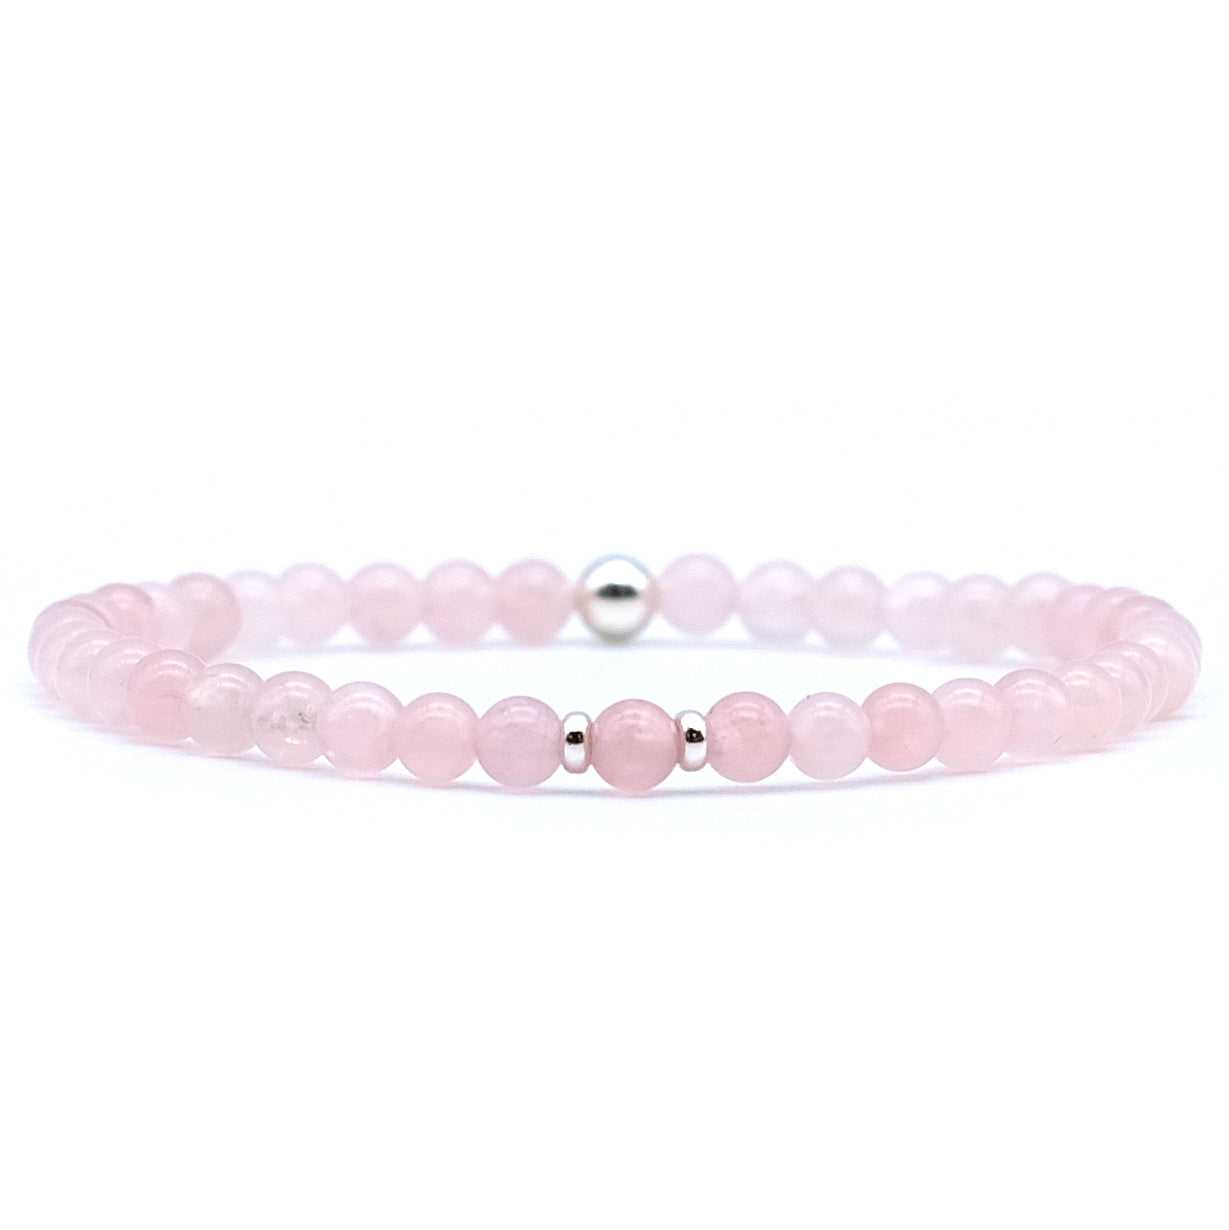 A rose quartz gemstone bracelet in 4mm beads with silver accessories